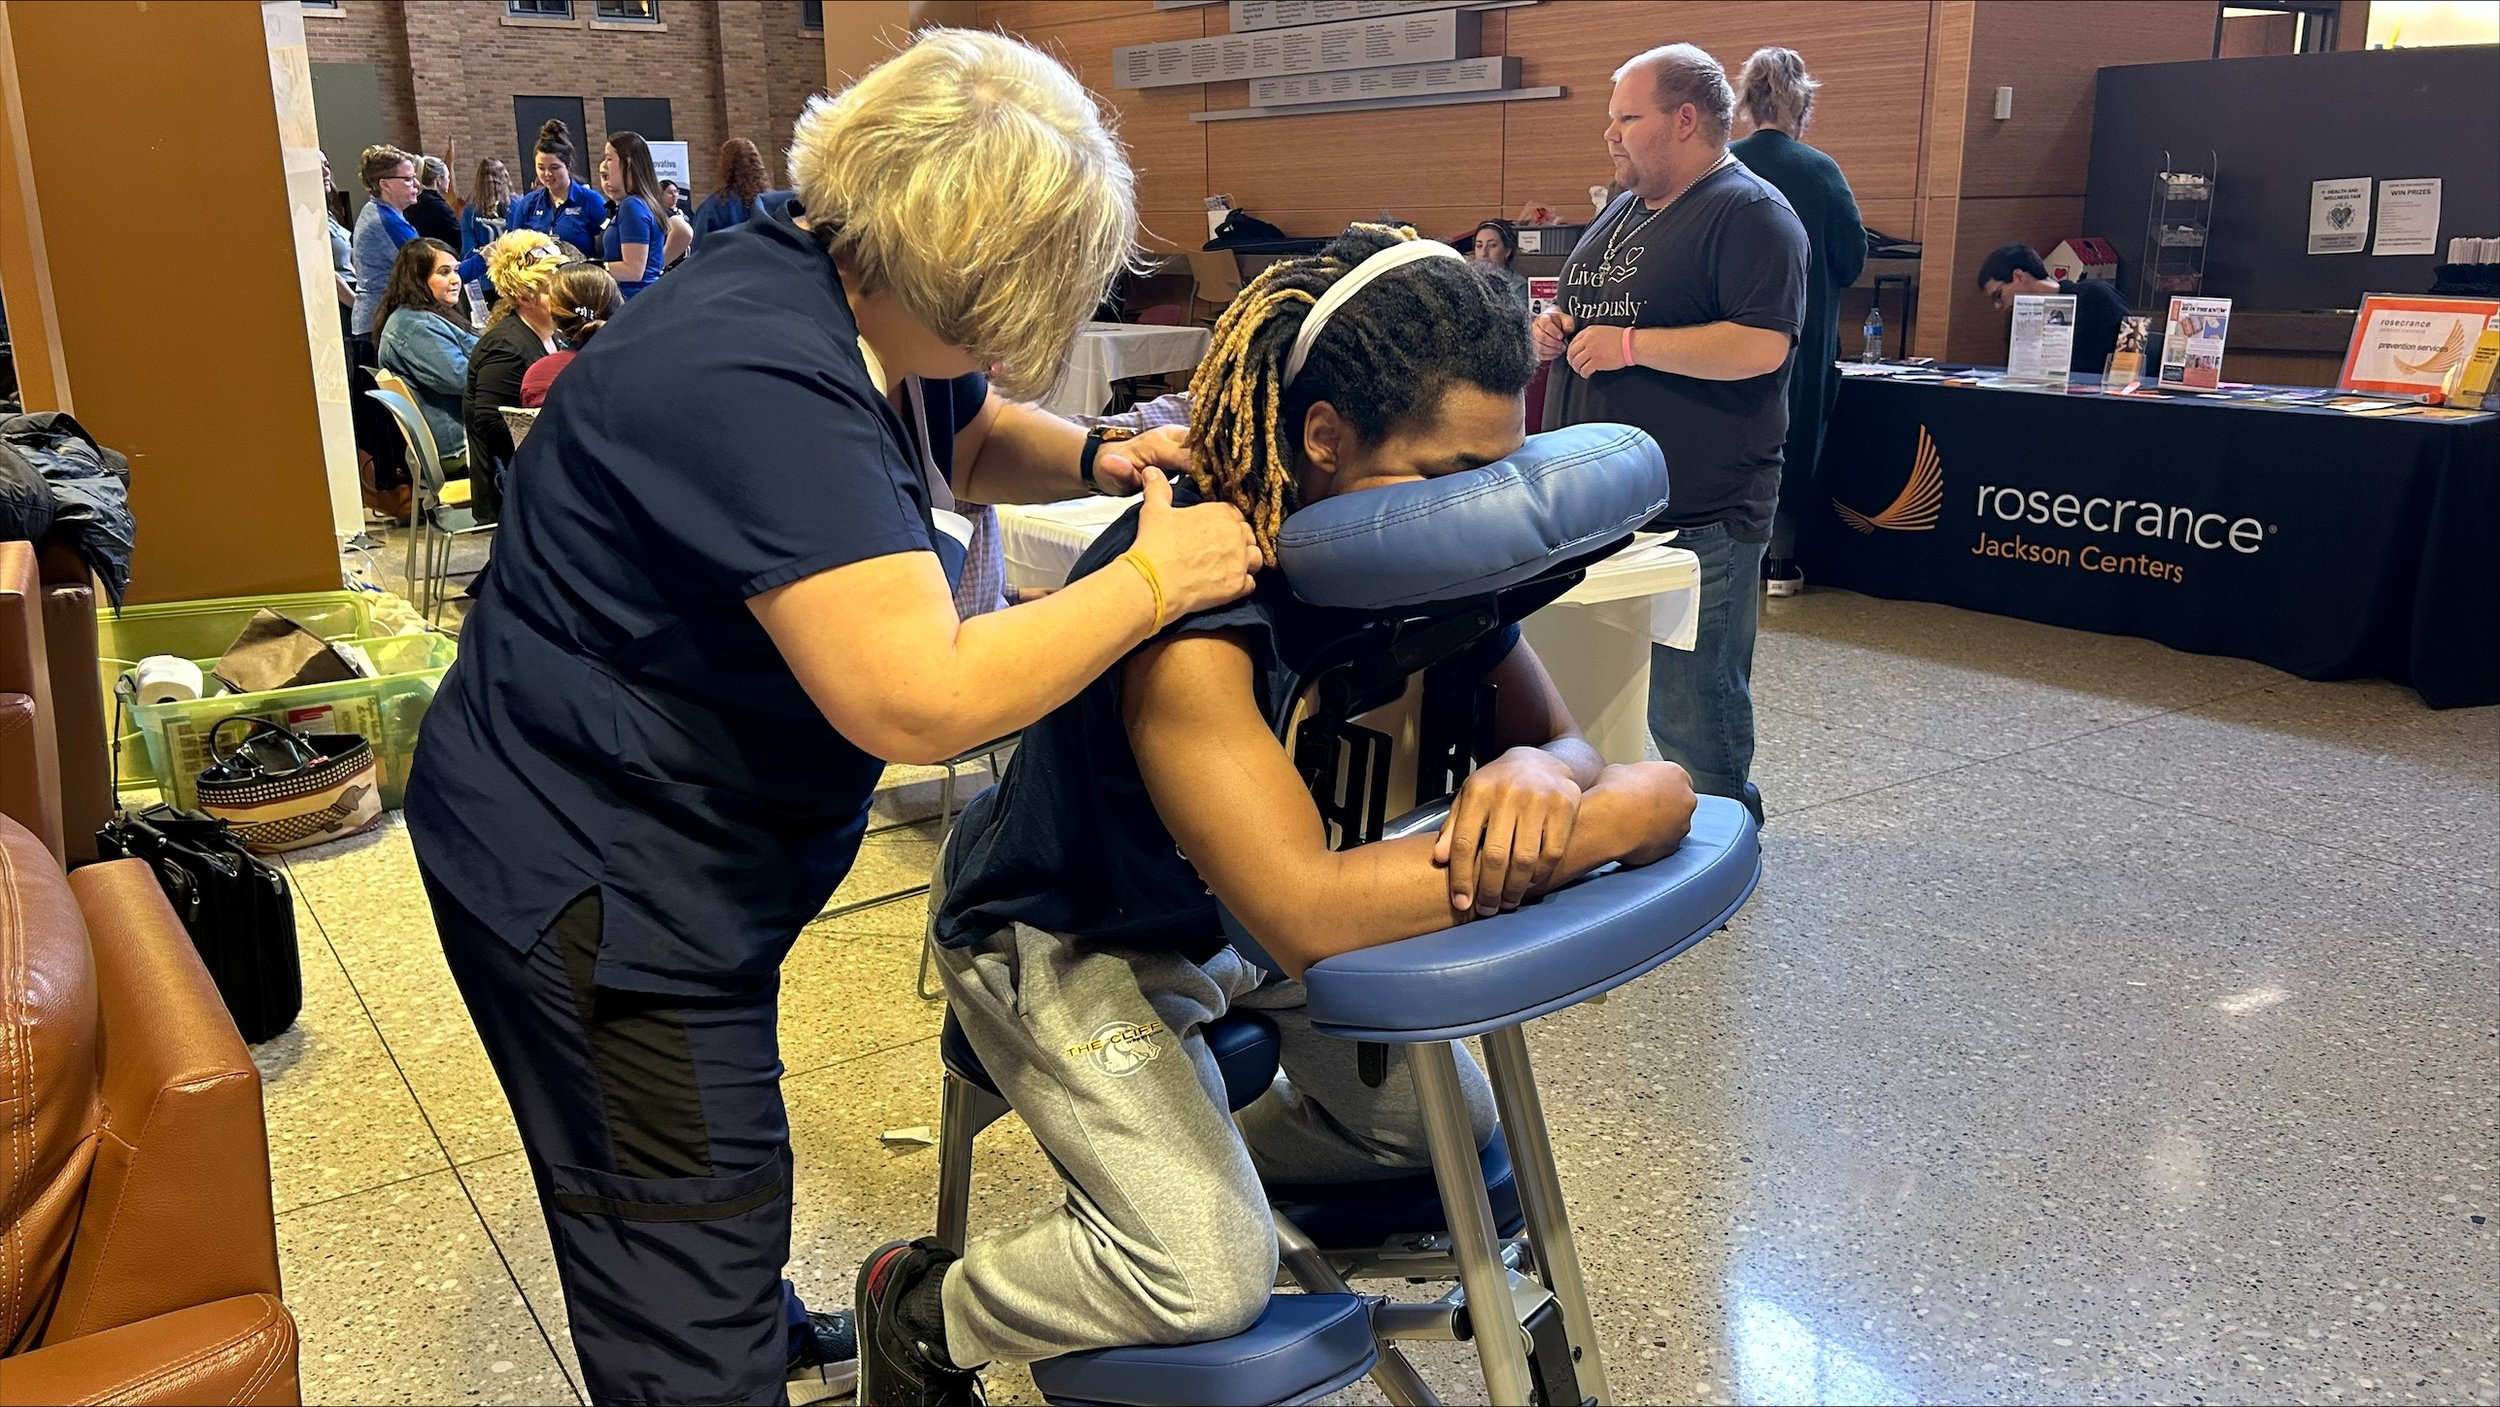  Trevon Gilliam and other people on campus were able to get a free massage from The Main Street Massage and Wellness Center.&nbsp; 